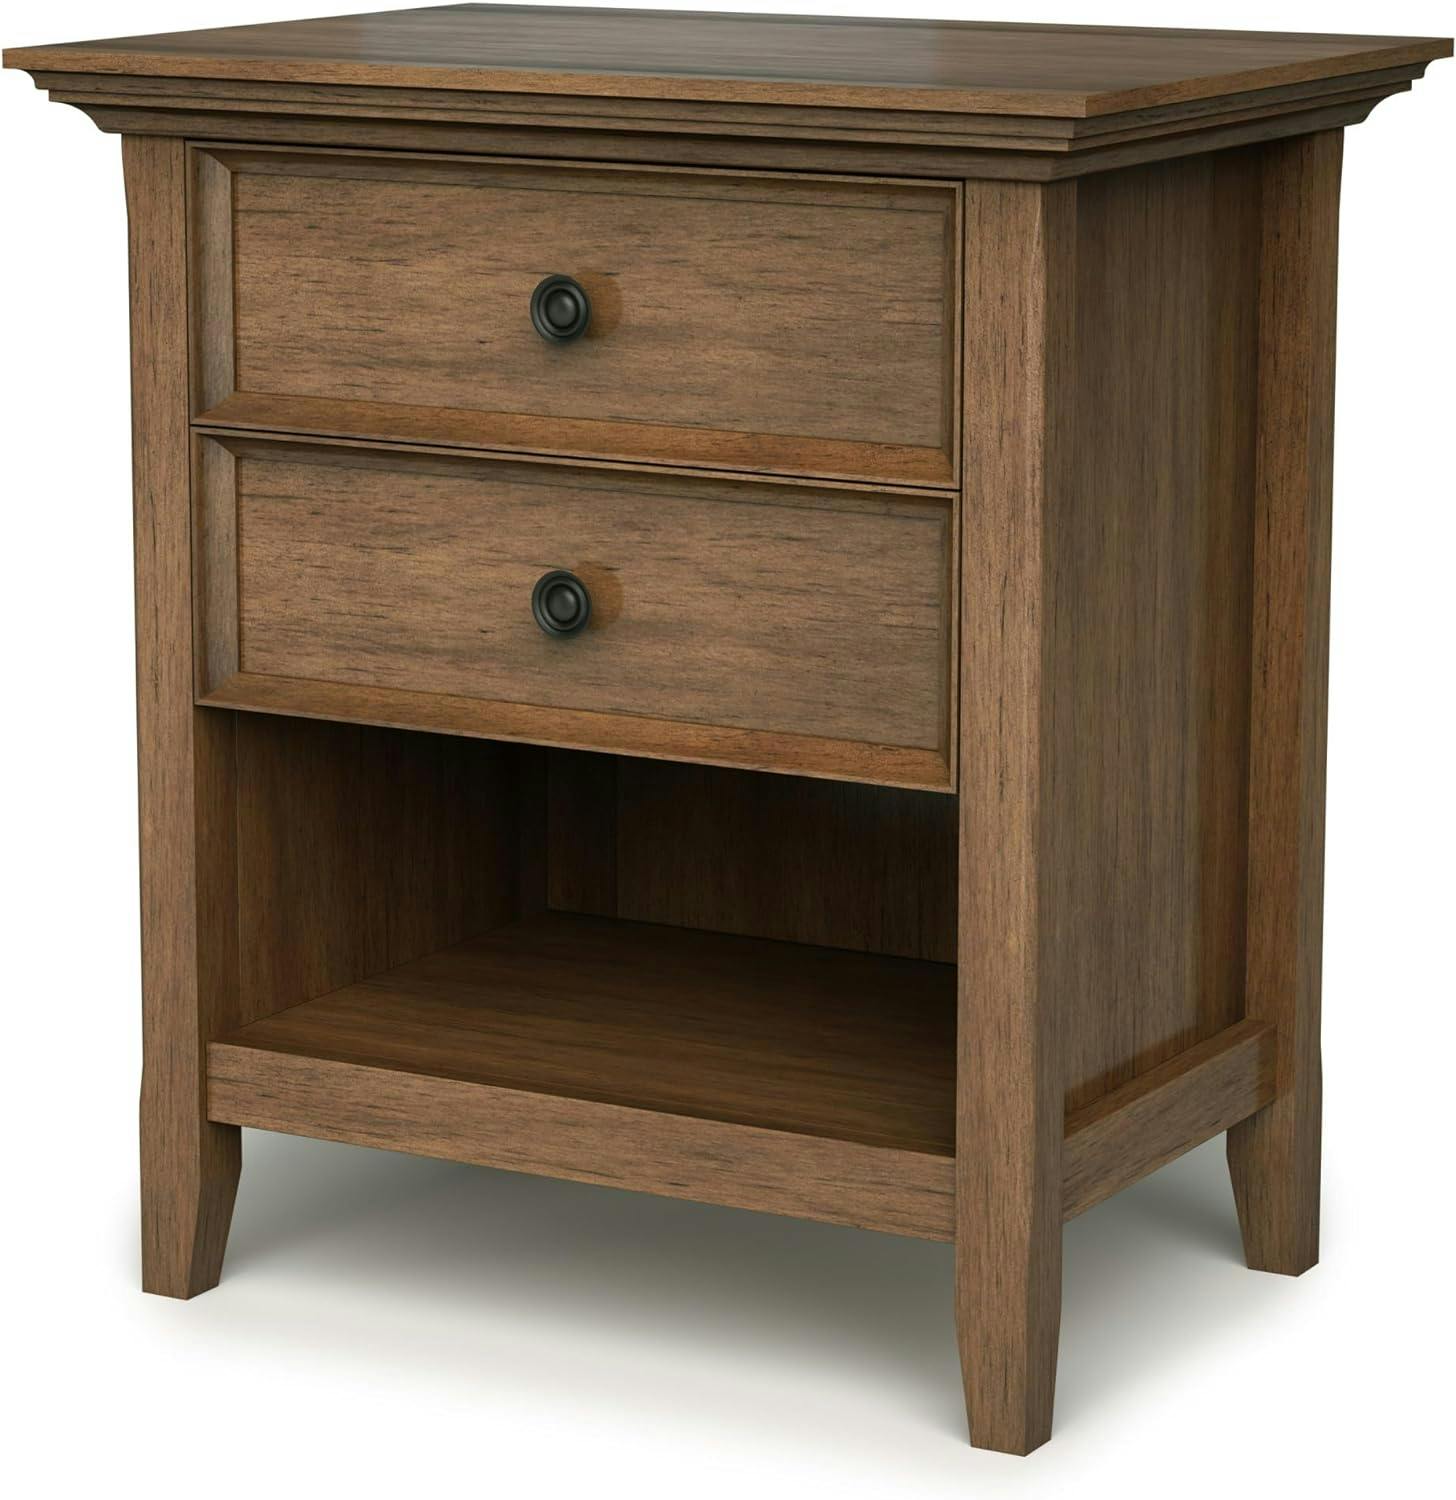 Amherst Rustic Natural Aged Brown Solid Wood Bedside Nightstand with 2 Drawers